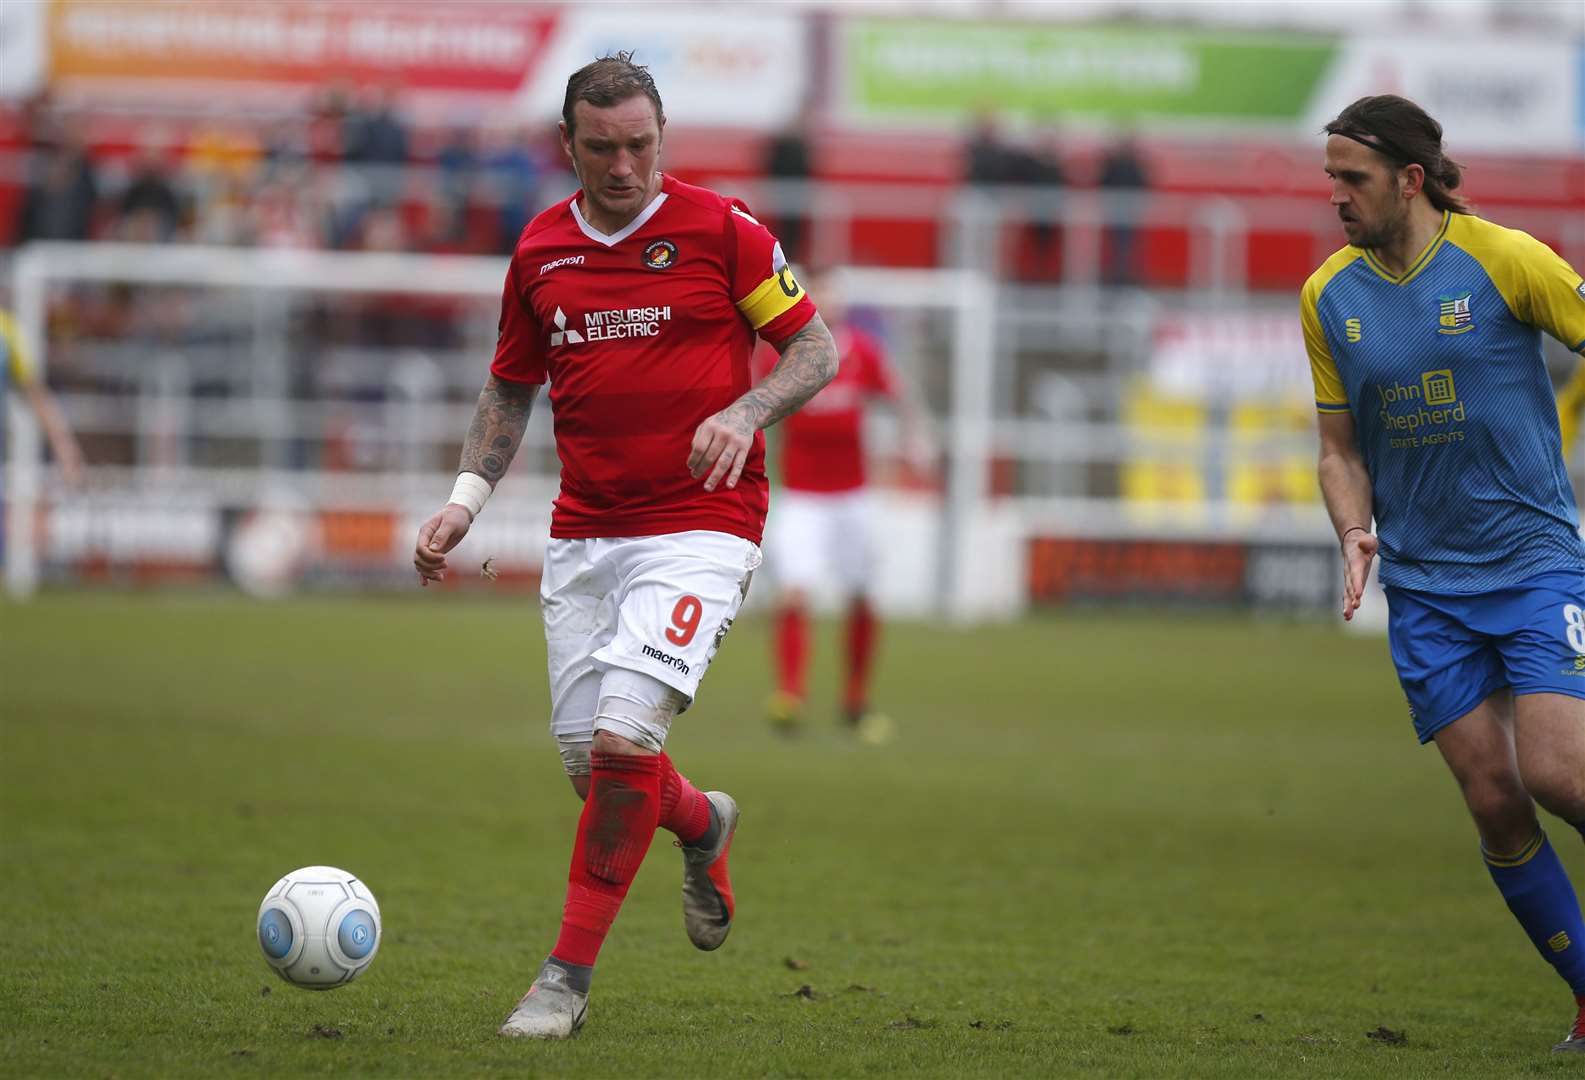 Danny Kedwell on the ball for Ebbsfleet Picture: Andy Jones